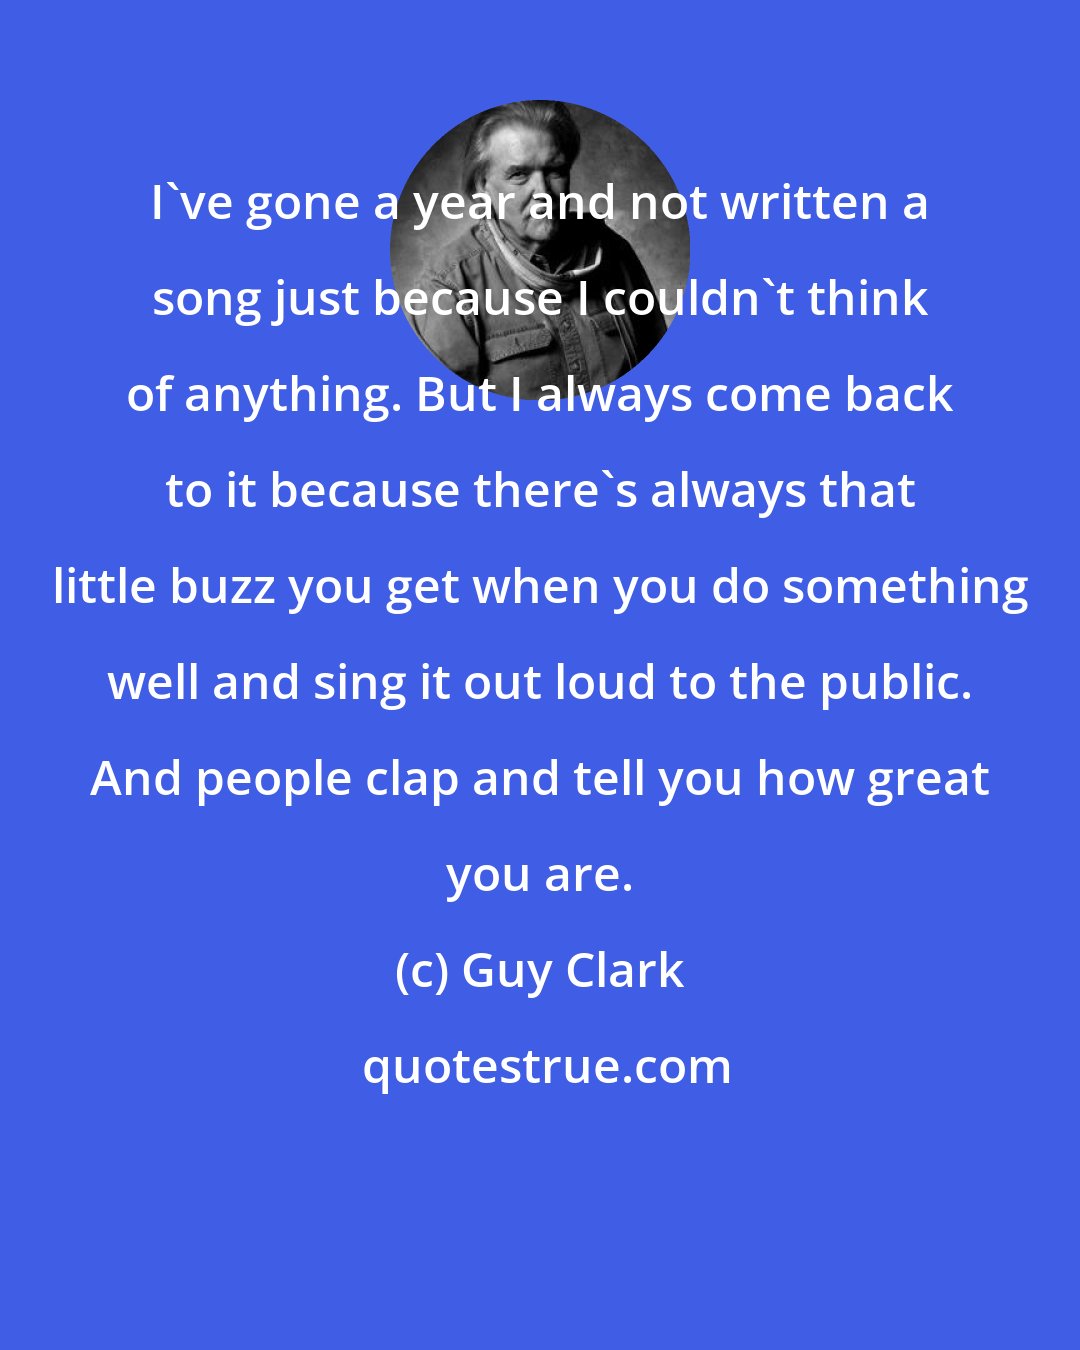 Guy Clark: I've gone a year and not written a song just because I couldn't think of anything. But I always come back to it because there's always that little buzz you get when you do something well and sing it out loud to the public. And people clap and tell you how great you are.